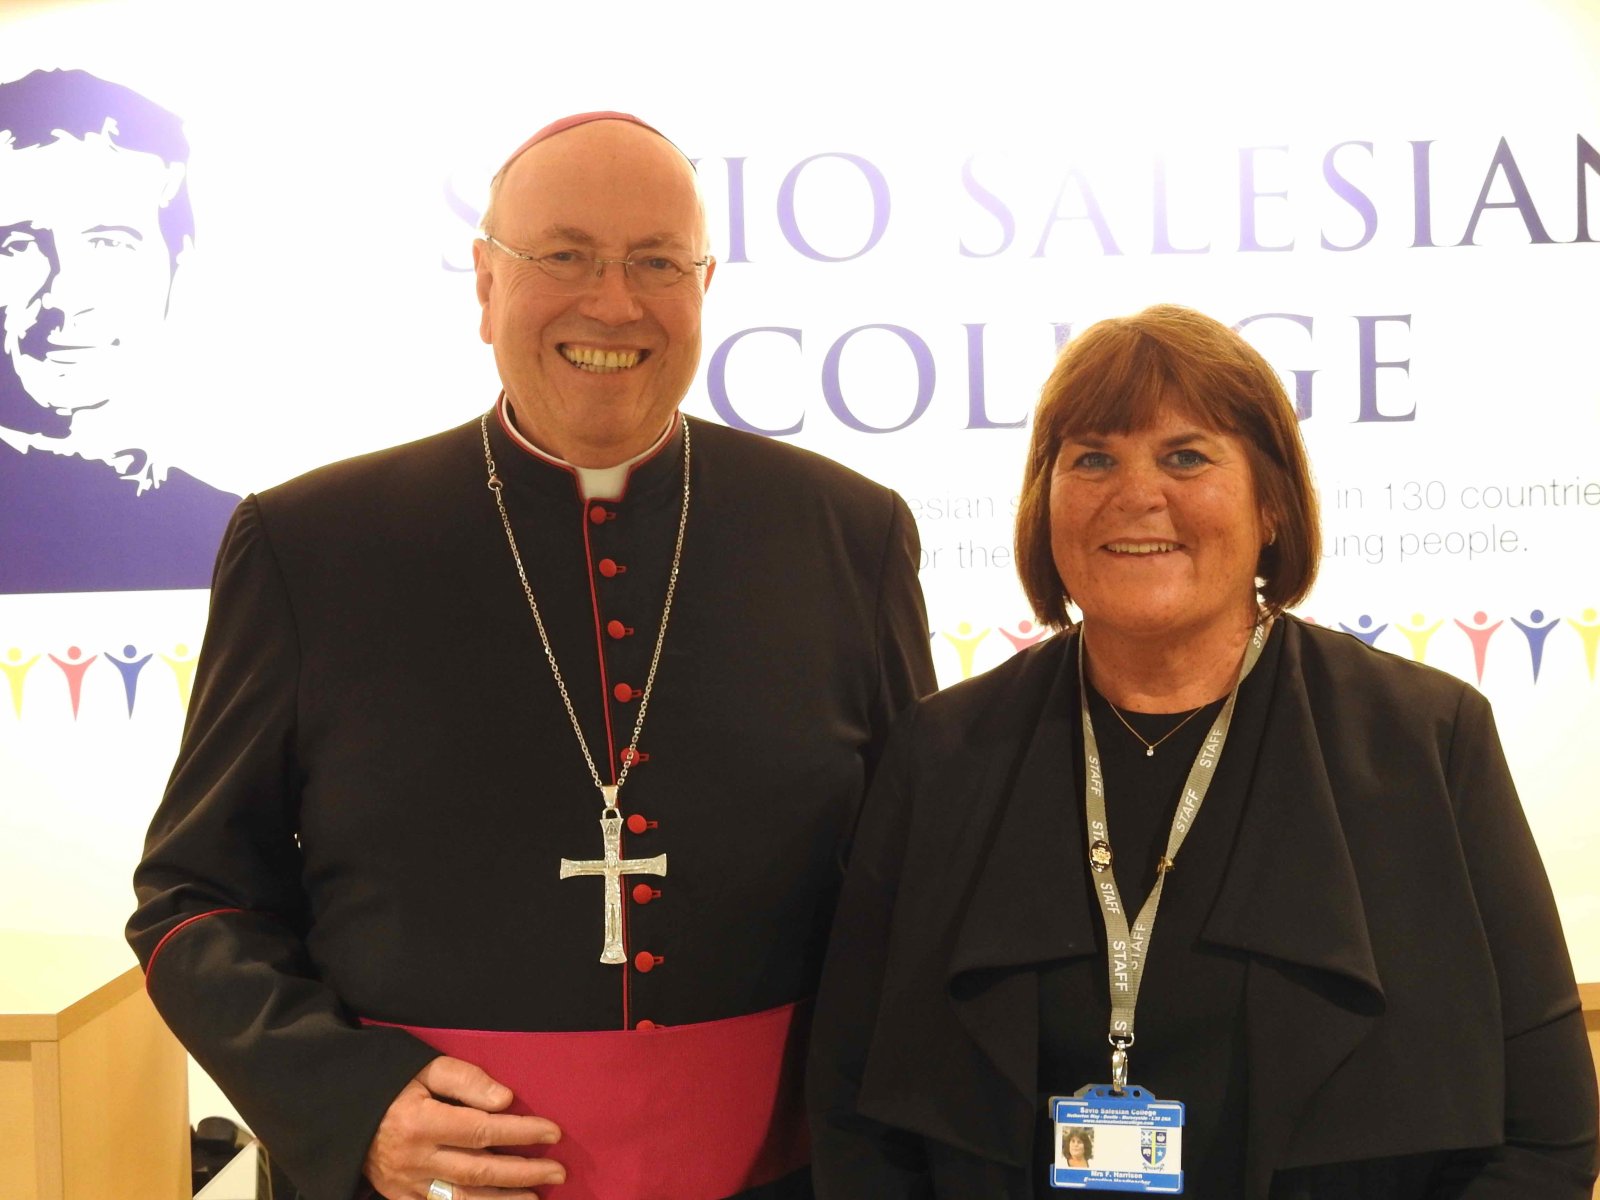 SAVIO SALESIAN COLLEGE - Celebrating 50 years of Ministry and Education